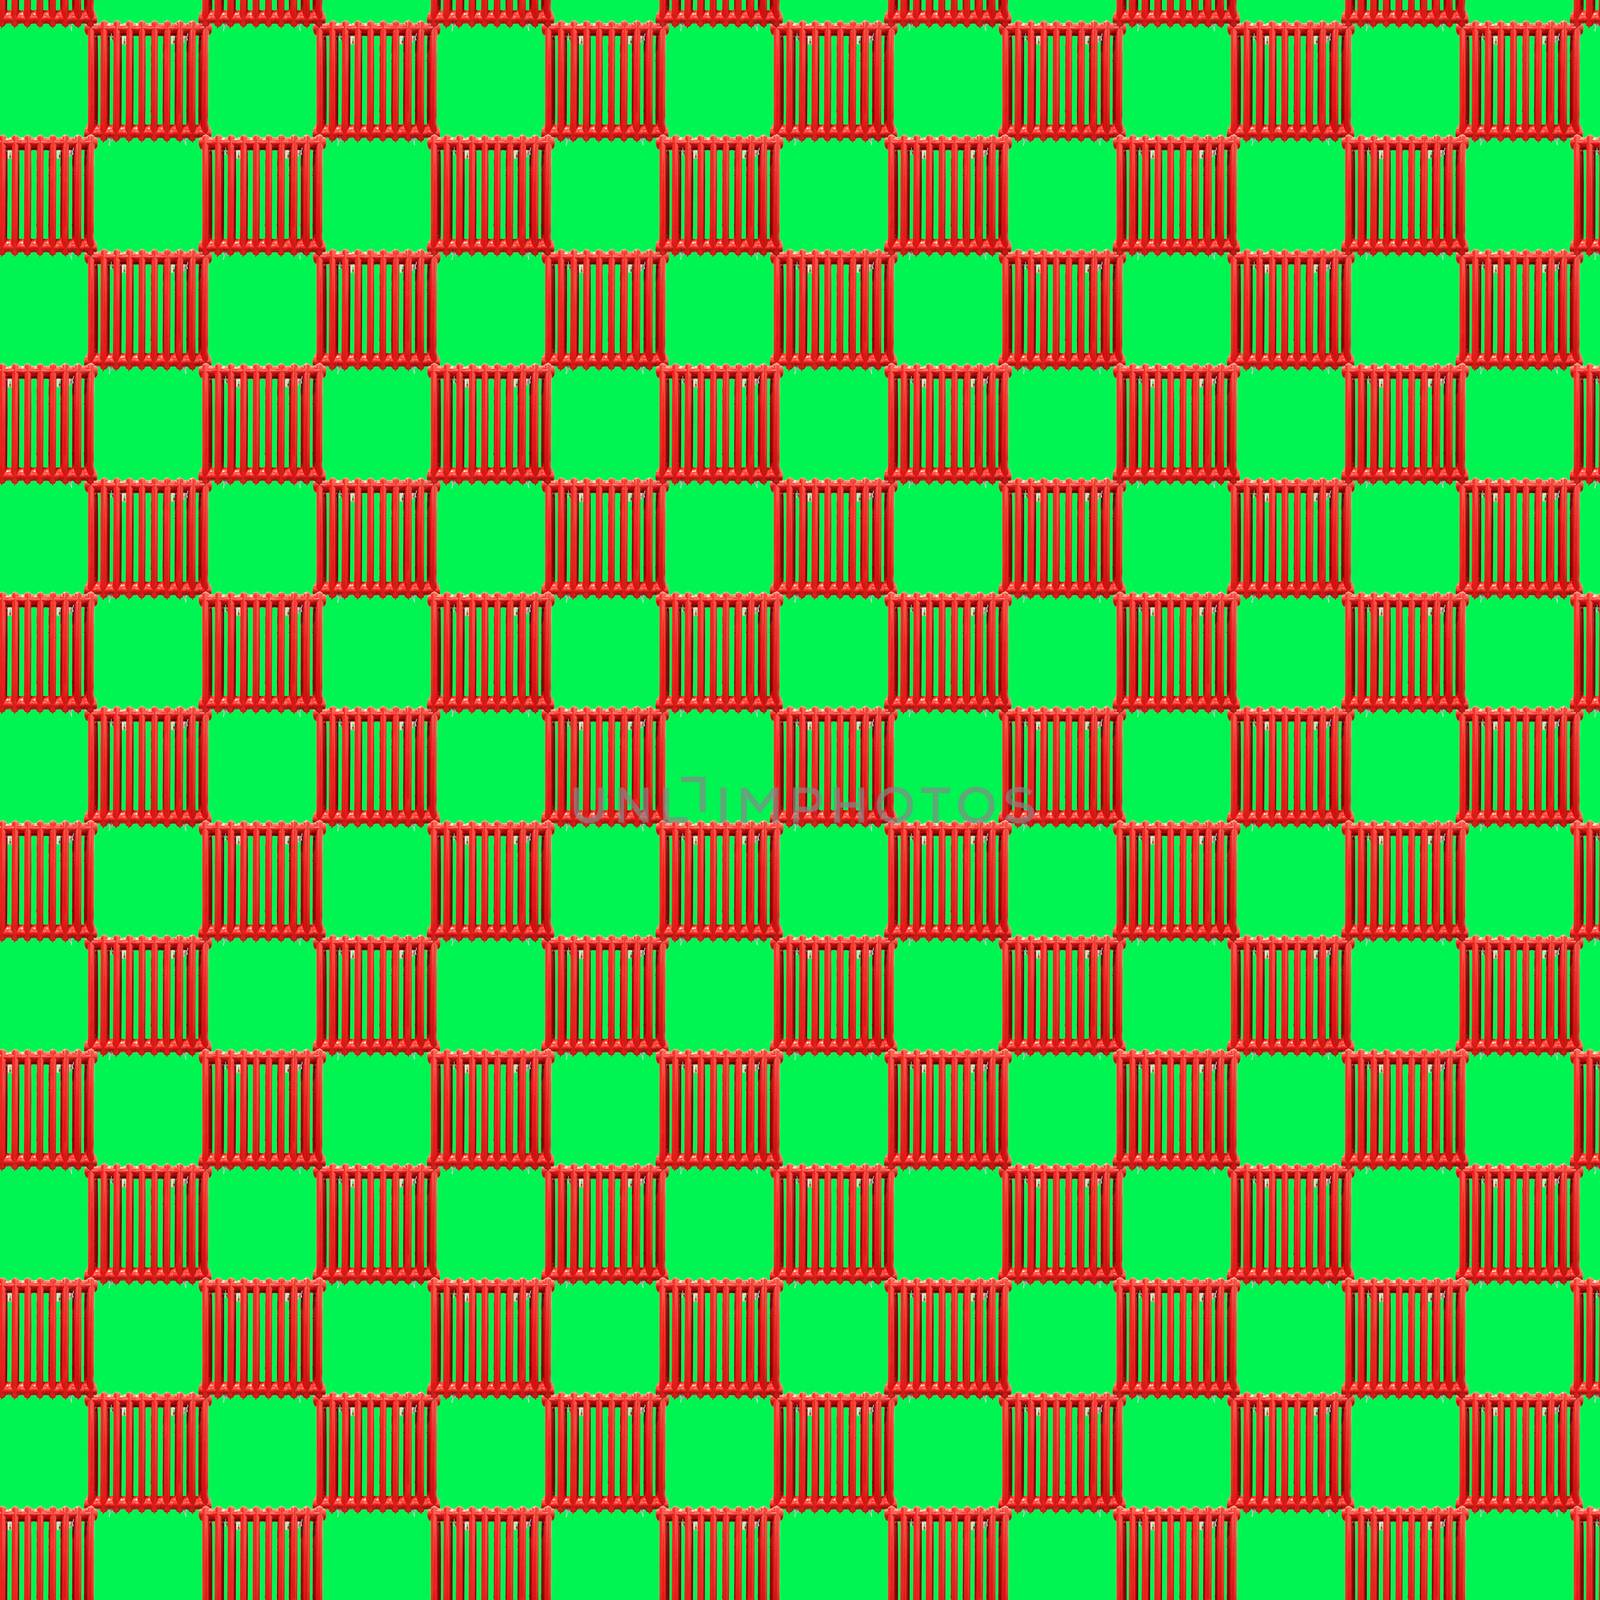 Seamless pattern with red heating radiator on a light green background. Modern style isometric concept.